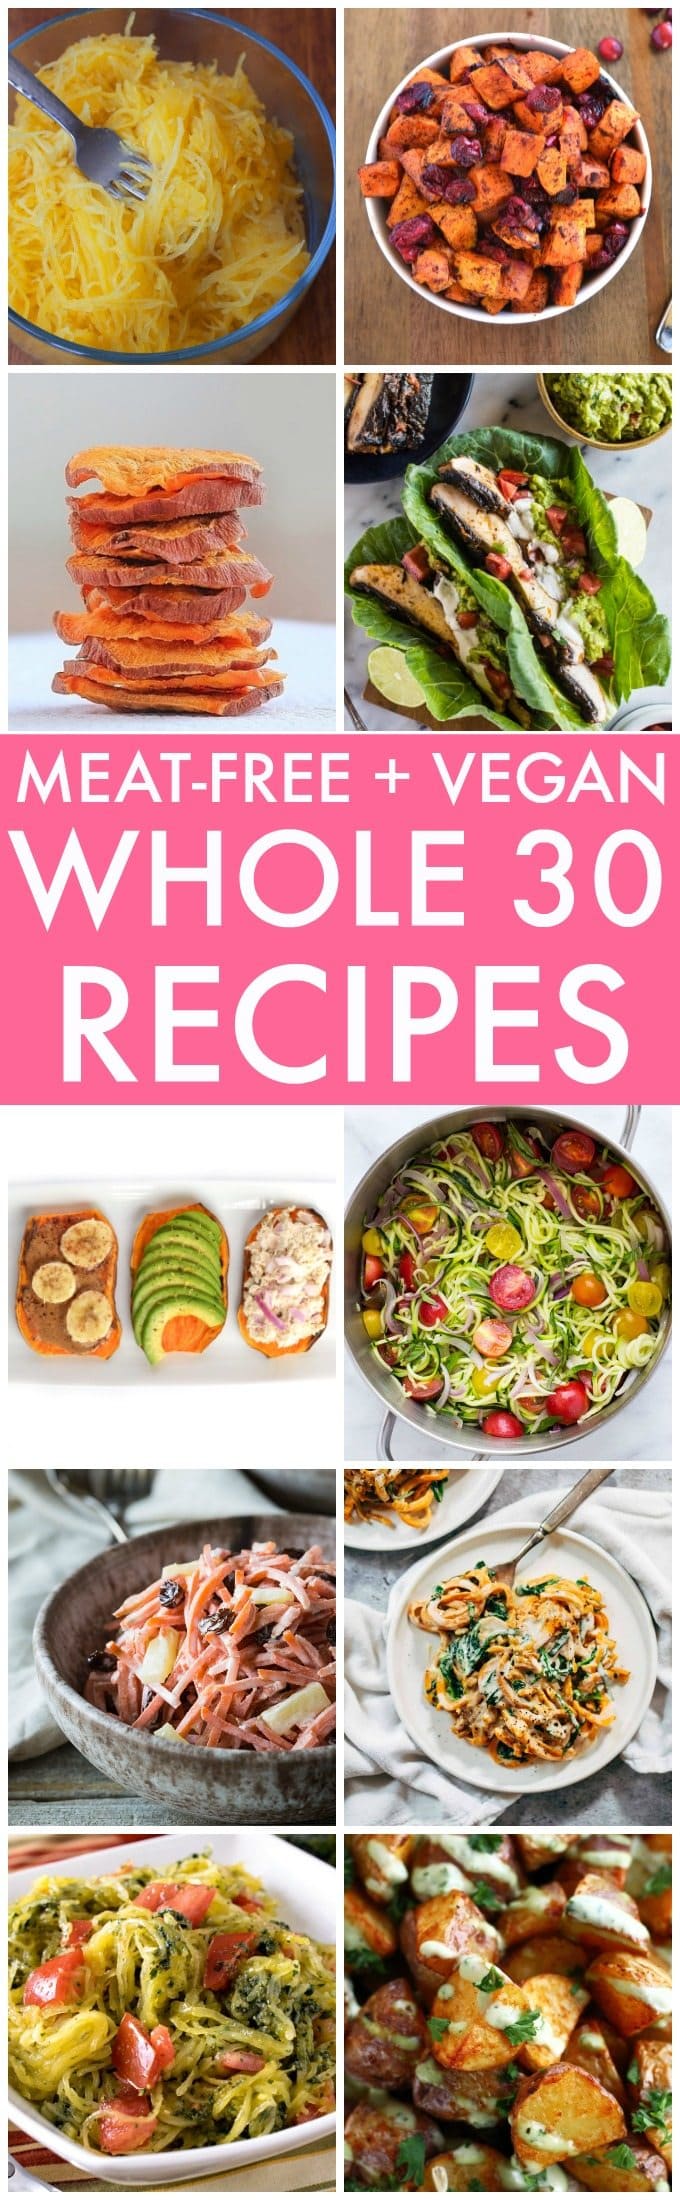 The BEST Meat-Free and Vegan Whole30 Recipes (Whole 30, Paleo, V, GF)- The BEST easy, quick and healthy whole30 recipes plant-based! Lunch, dinner, snacks and salads! {vegan, gluten free, paleo, whole30 recipe}- thebigmansworld.com